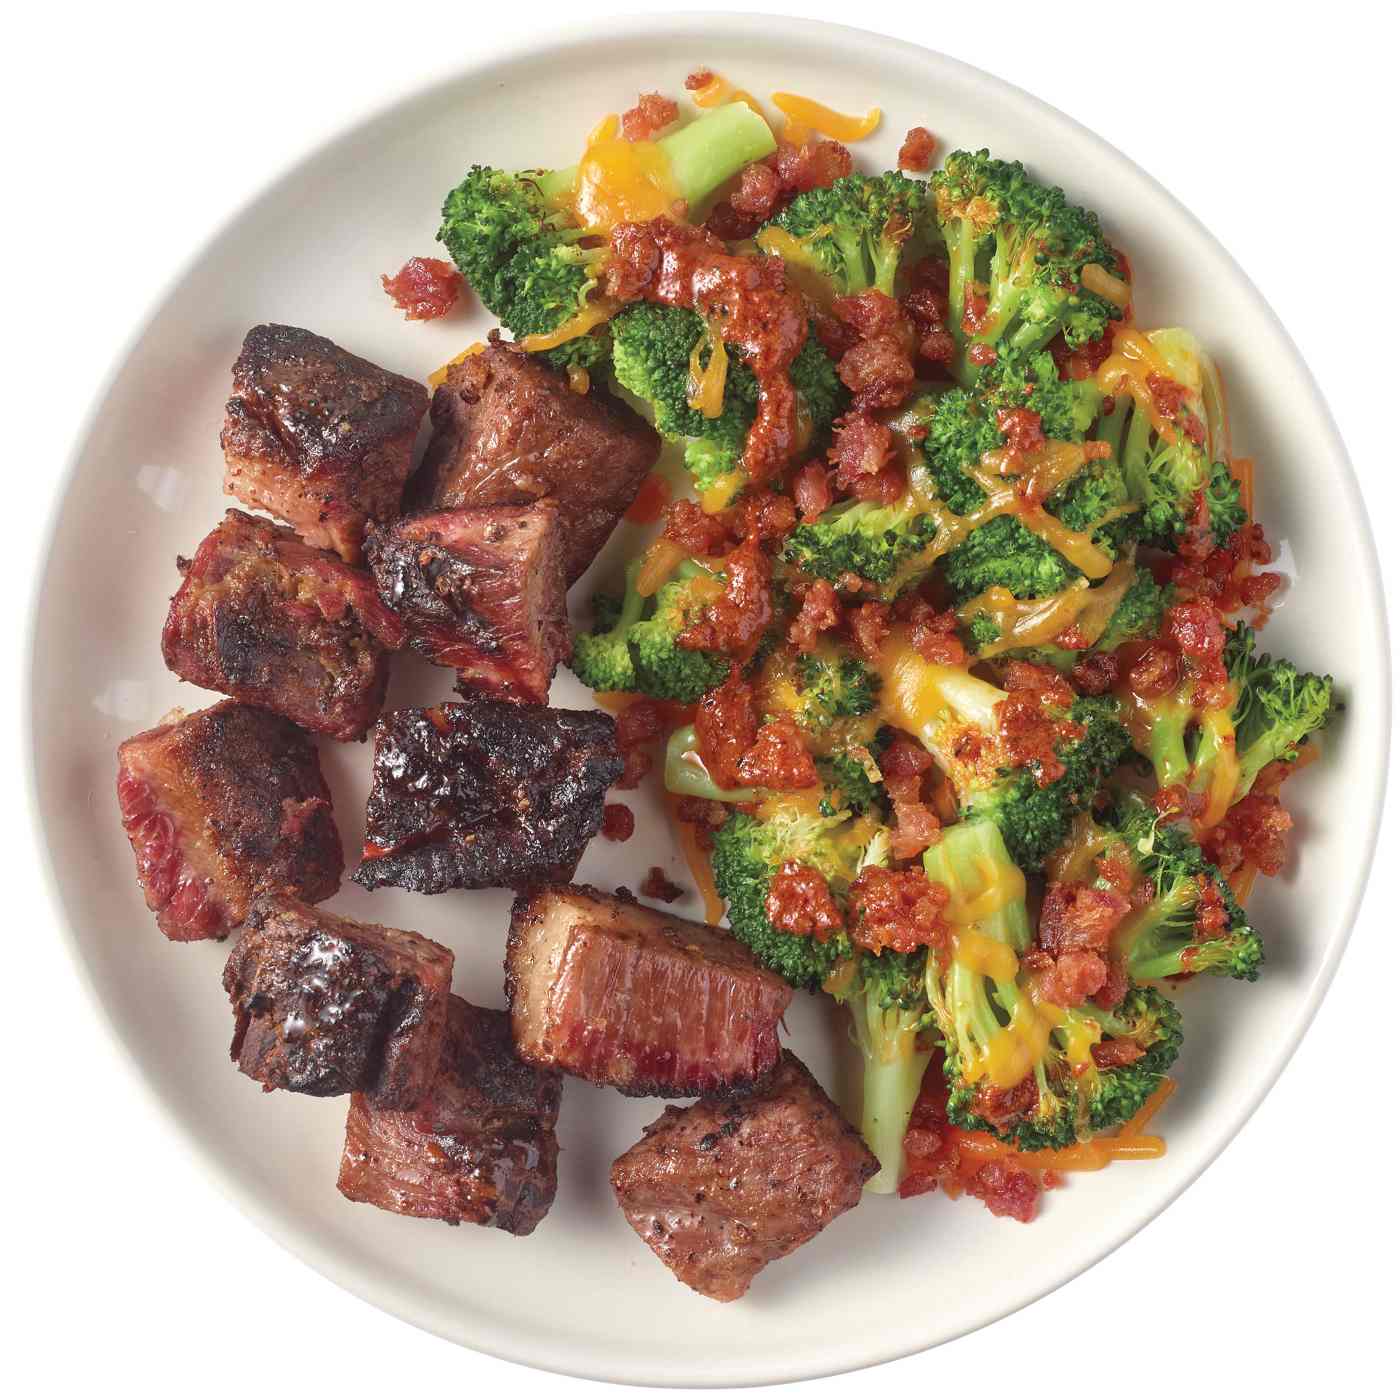 Meal Simple by H-E-B Low-Carb Lifestyle Beef Brisket Burnt Ends & Broccoli; image 2 of 3